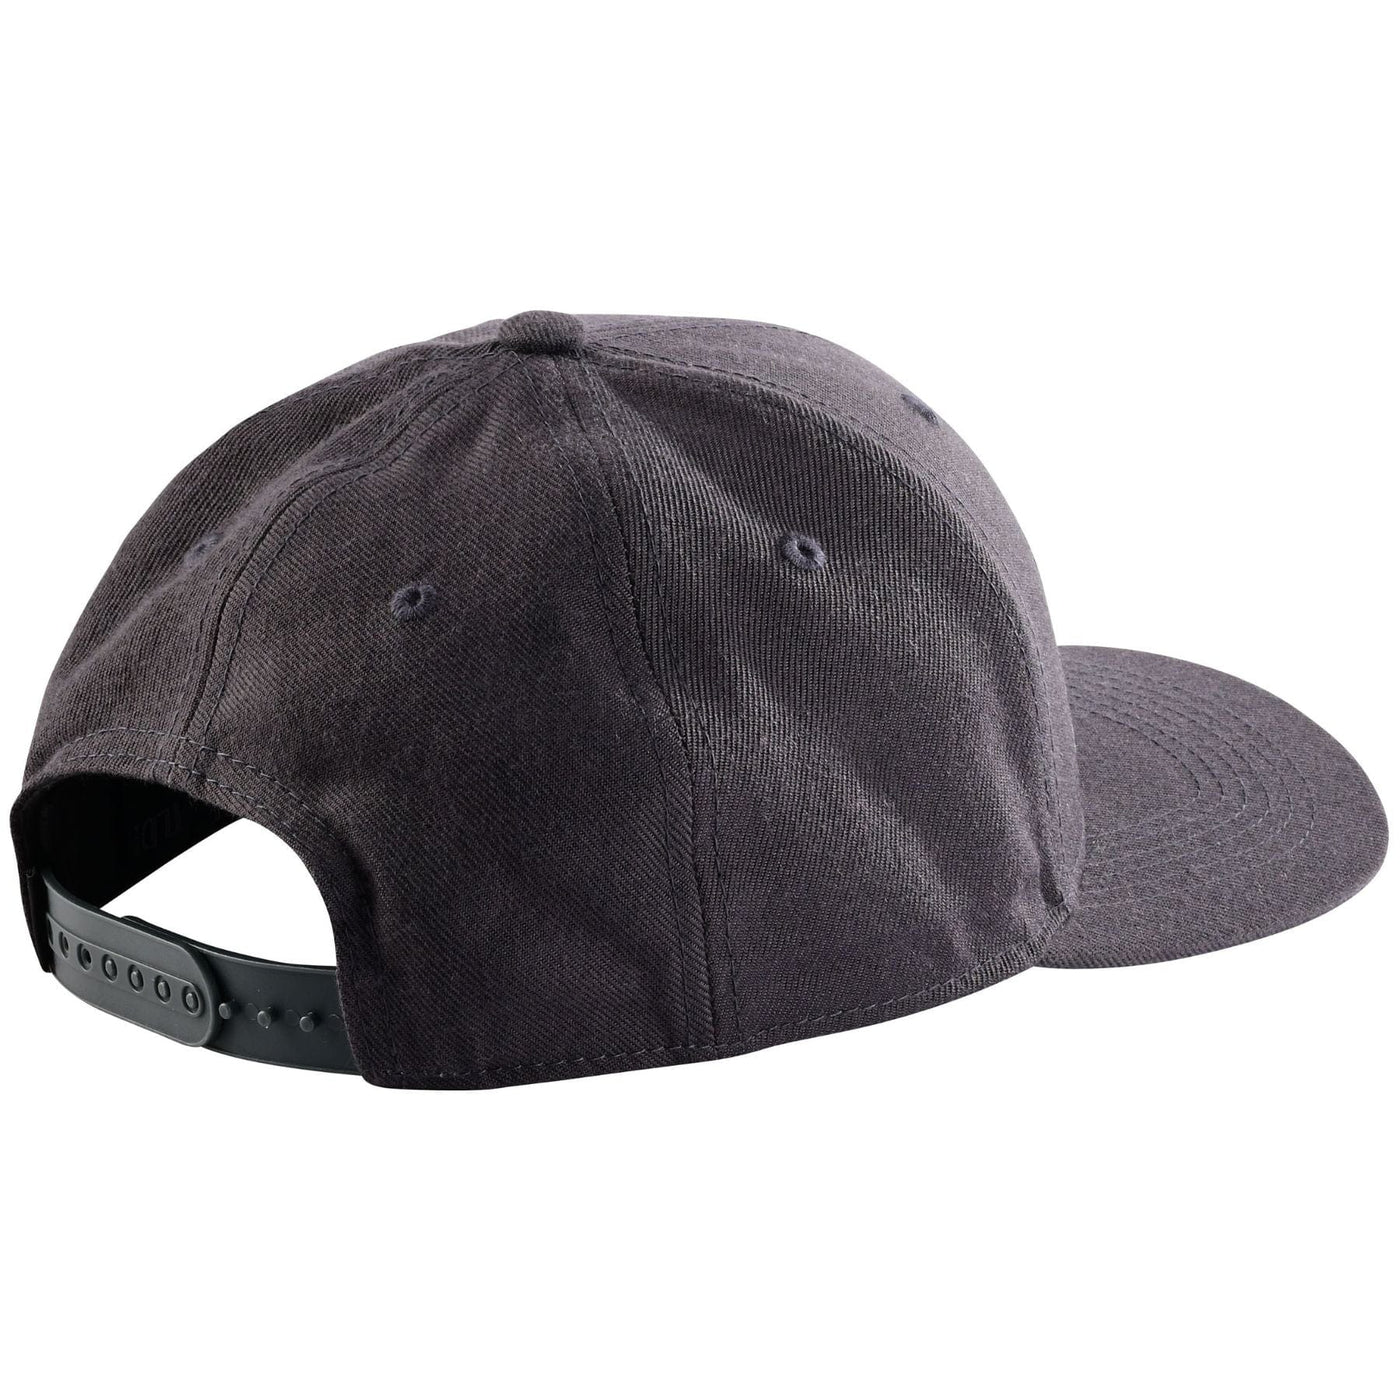 Troy Lee Designs 9FORTY Crop Snapback Hat - Gray/Charcoal 8Lines Shop - Fast Shipping